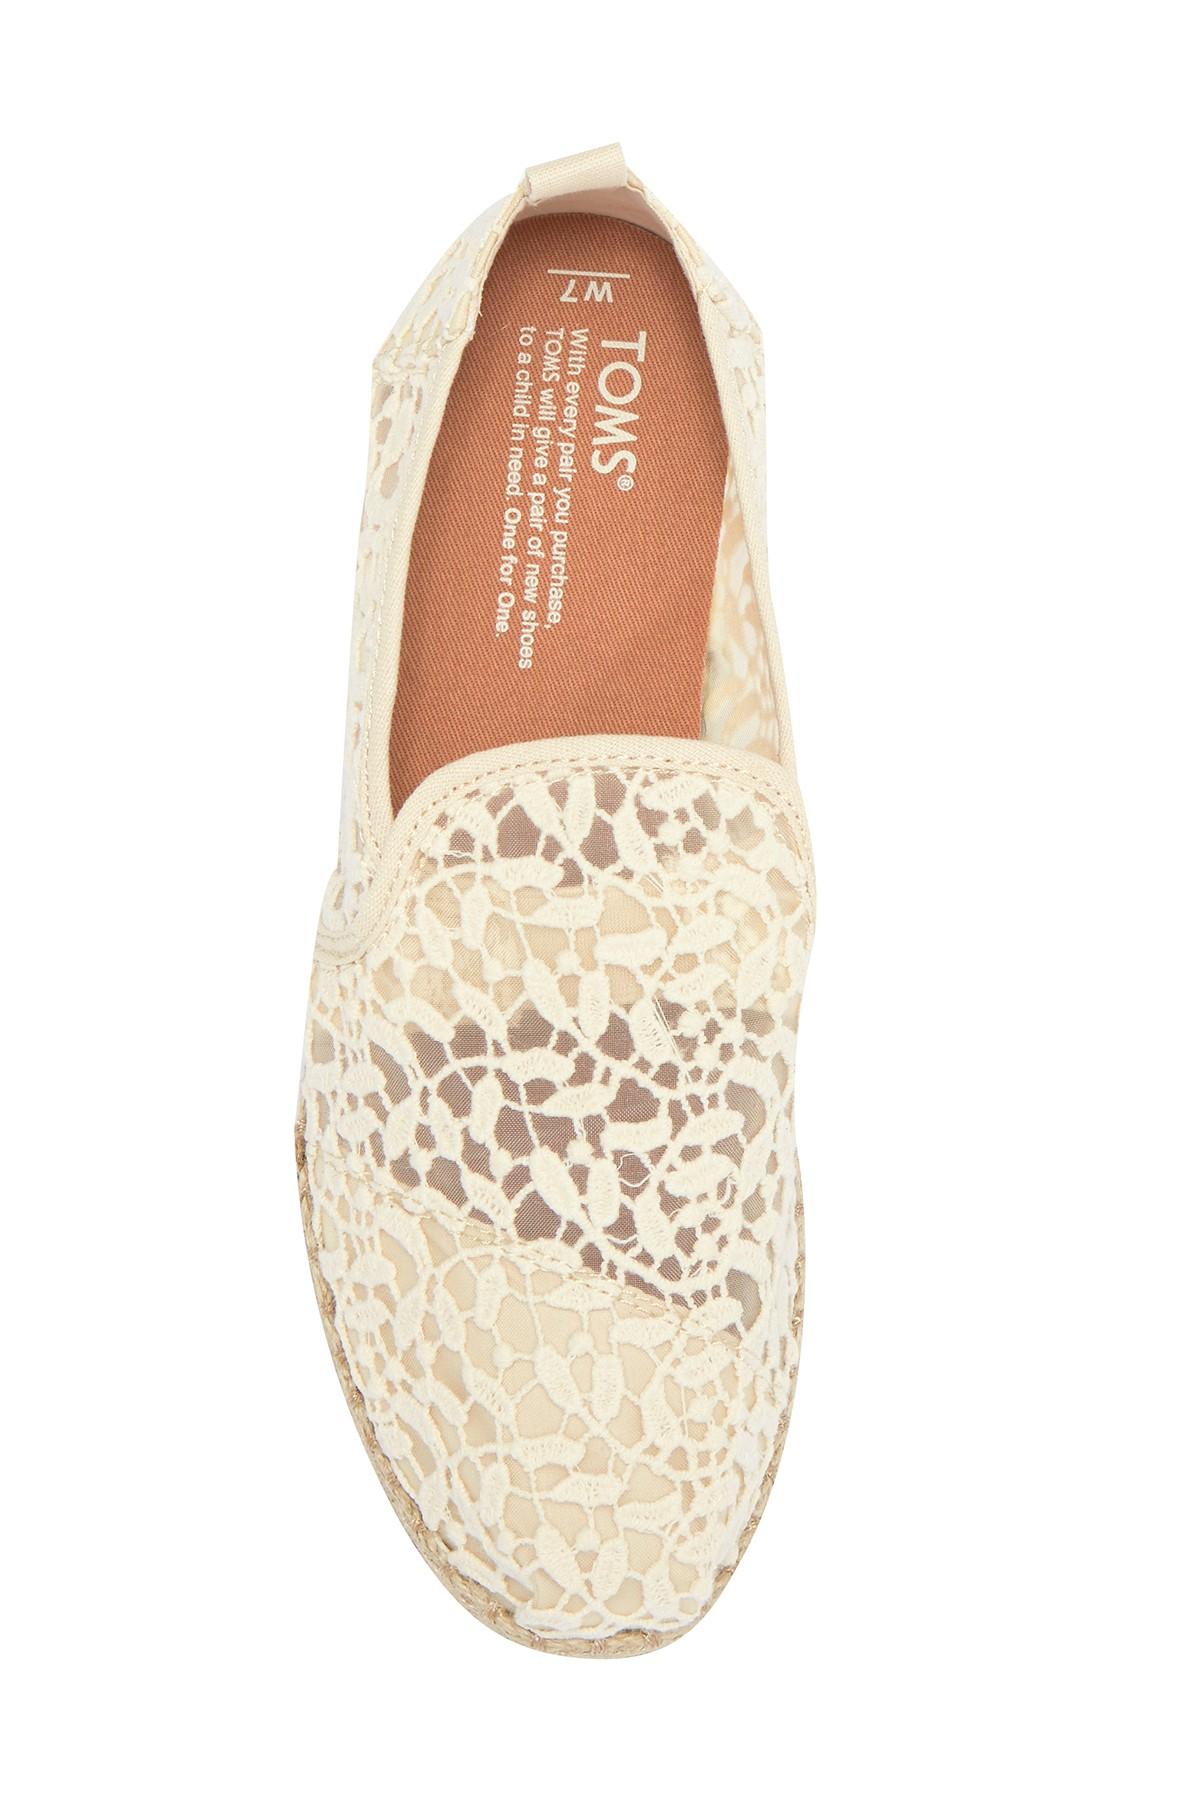 TOMS Floral Lace Deconstructed Alpargata Slip-on Espadrille Sneaker in ...